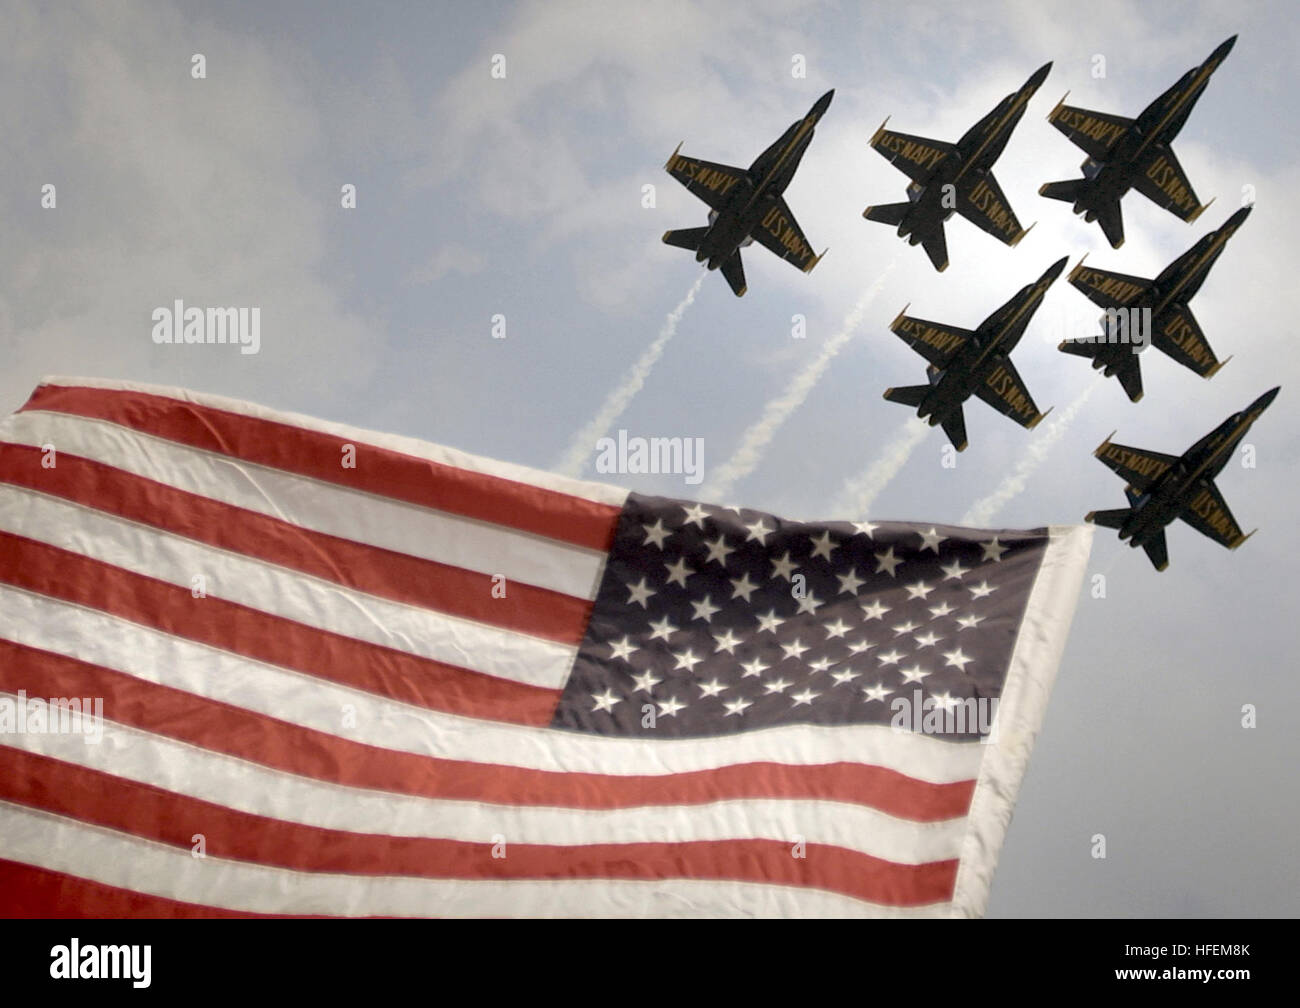 030626-N-1539M-002 North Kingstown, R.I.  (June 26, 2003) - The U.S. Navy's Flight Demonstration Team, 'Blue Angels', soars over Old Glory as they perform the 'Delta Formation' during an air show in North Kingstown, R.I., celebrating the centennial of powered flight. U.S. Navy photo by Photographer's Mate 2nd Class Saul McSween.  (RELEASED) US Navy 030626-N-1539M-002 The U.S. Navy's Flight Demonstration Team, Blue Angels soars over Old Glory as they perform the Delta Formation during an air show in North Kingstown, R.I Stock Photo